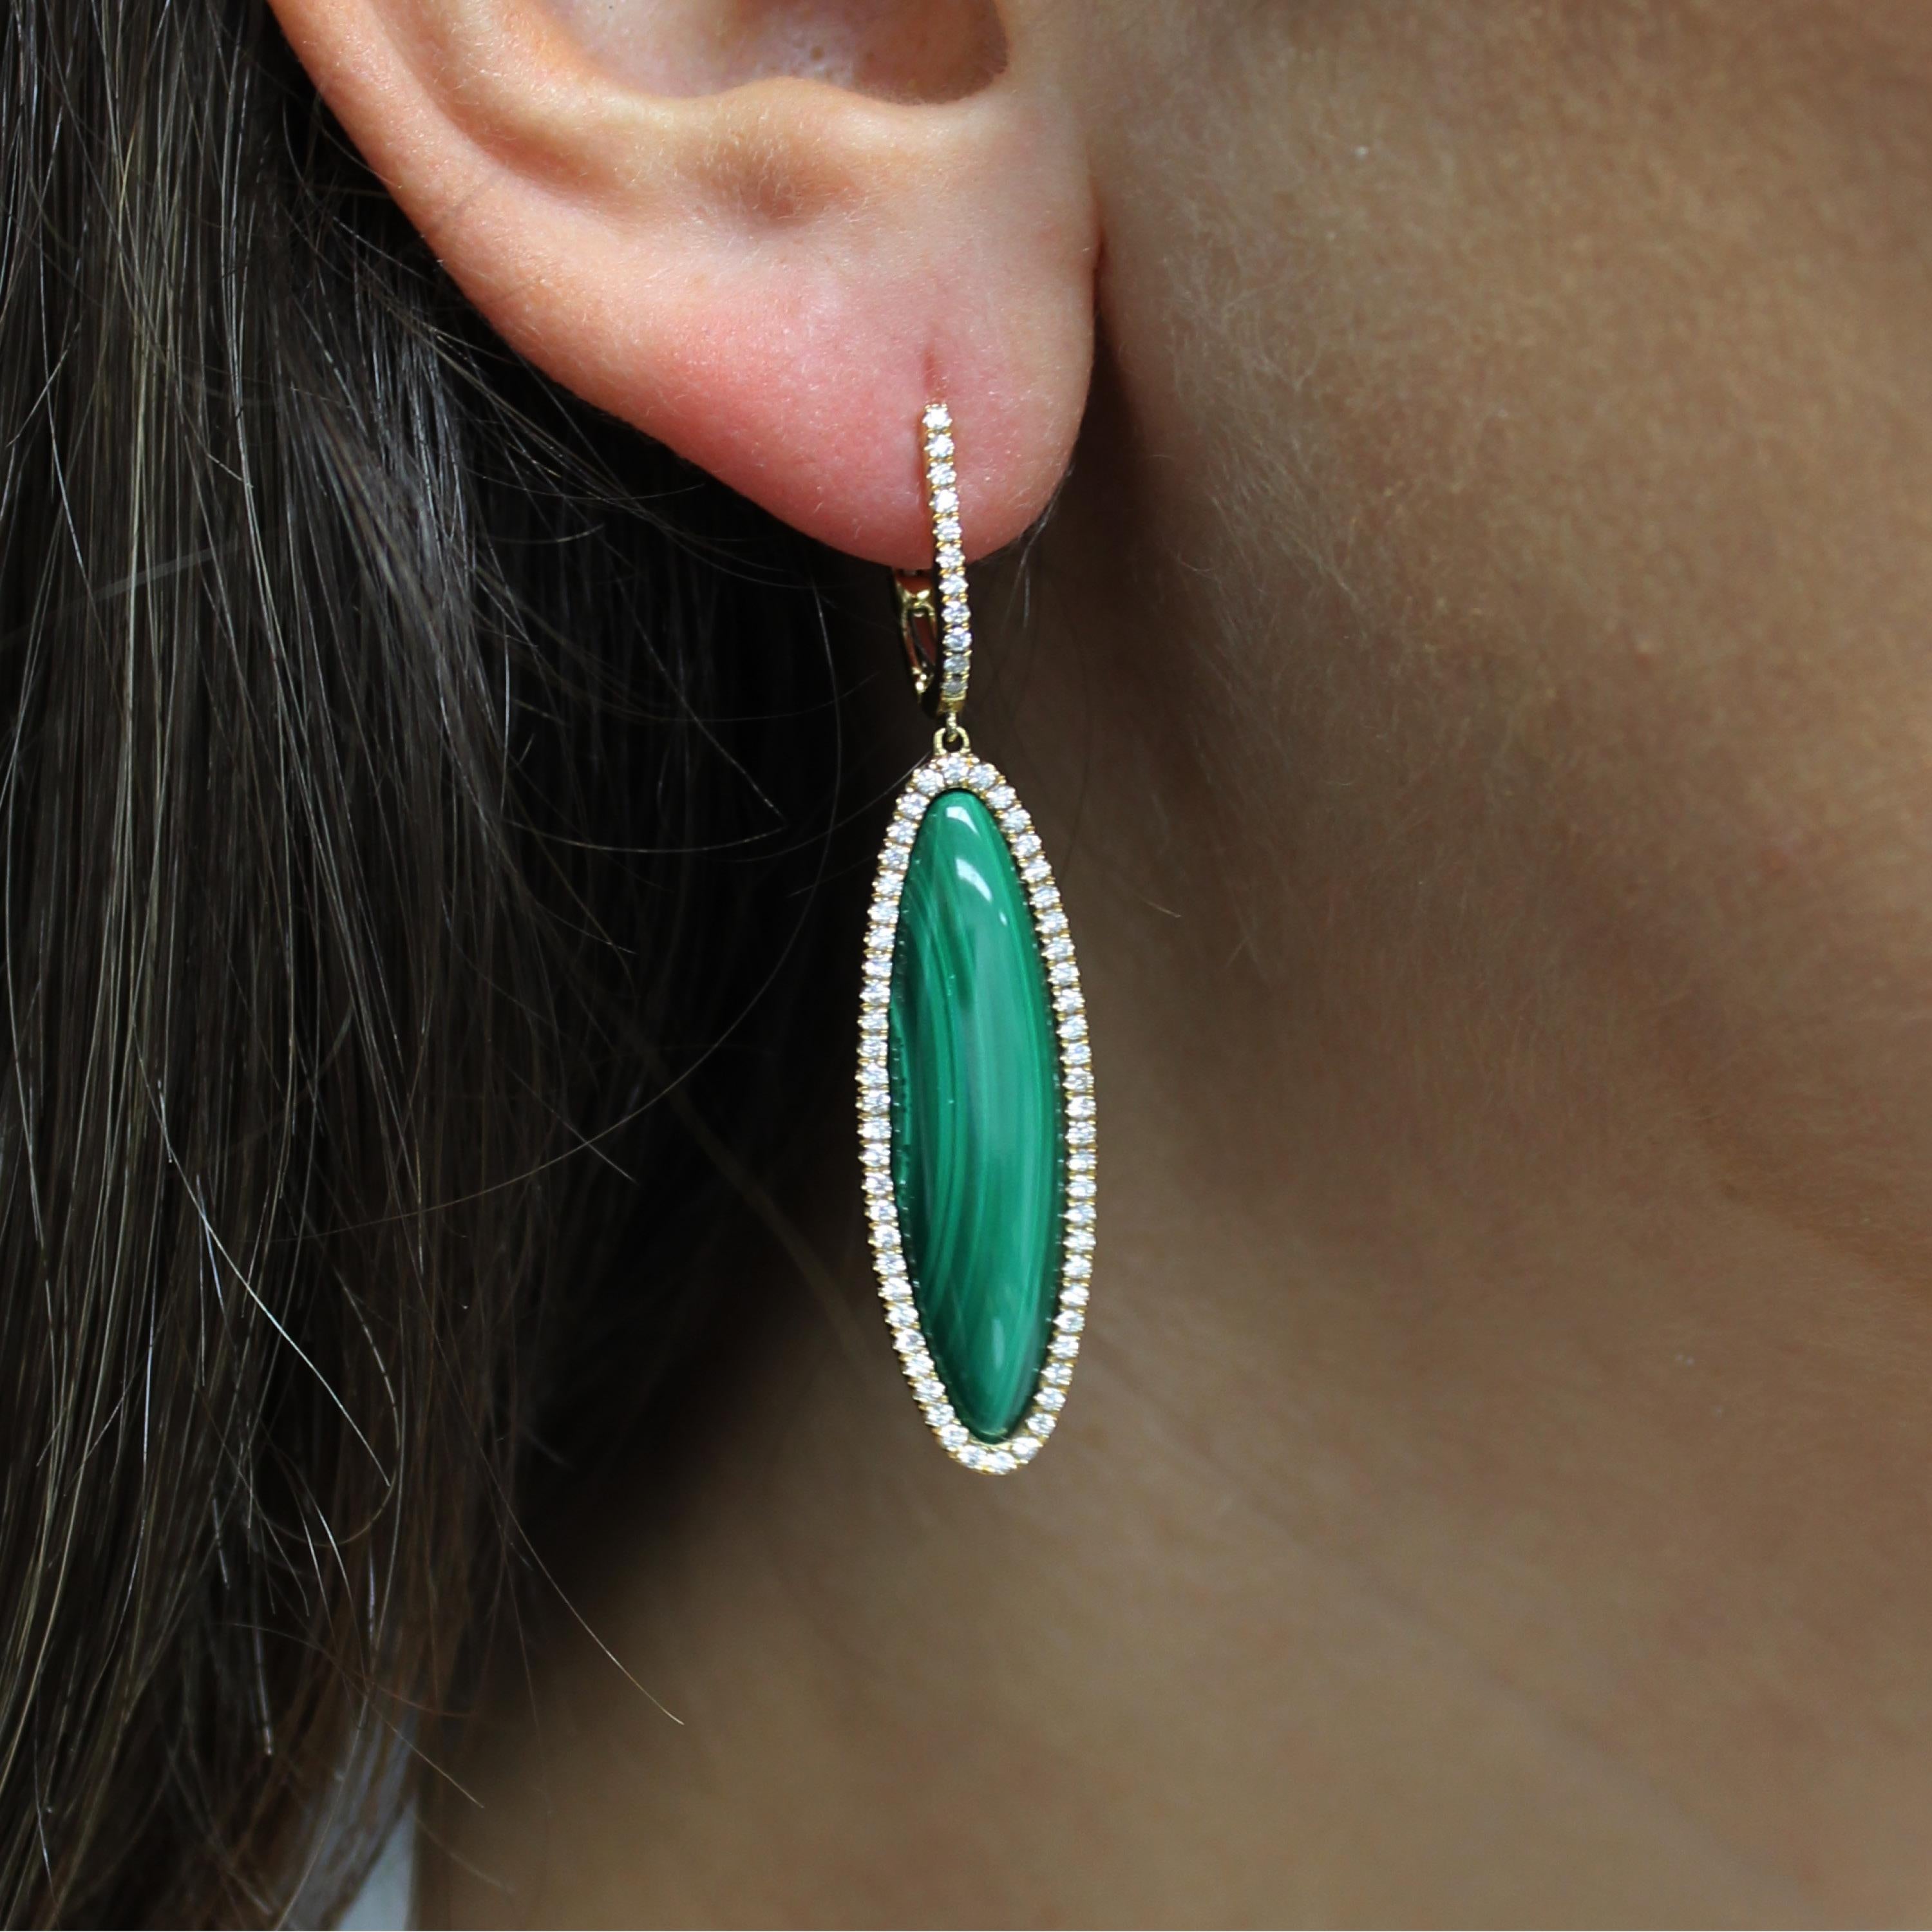 Verde Collection Earrings, with Long Oval Cabochon-cut Malachite, a halo of diamonds, and gold diamond huggie-tops, in 18K yellow gold. Malachite is stone of balance and abundance, and often called 